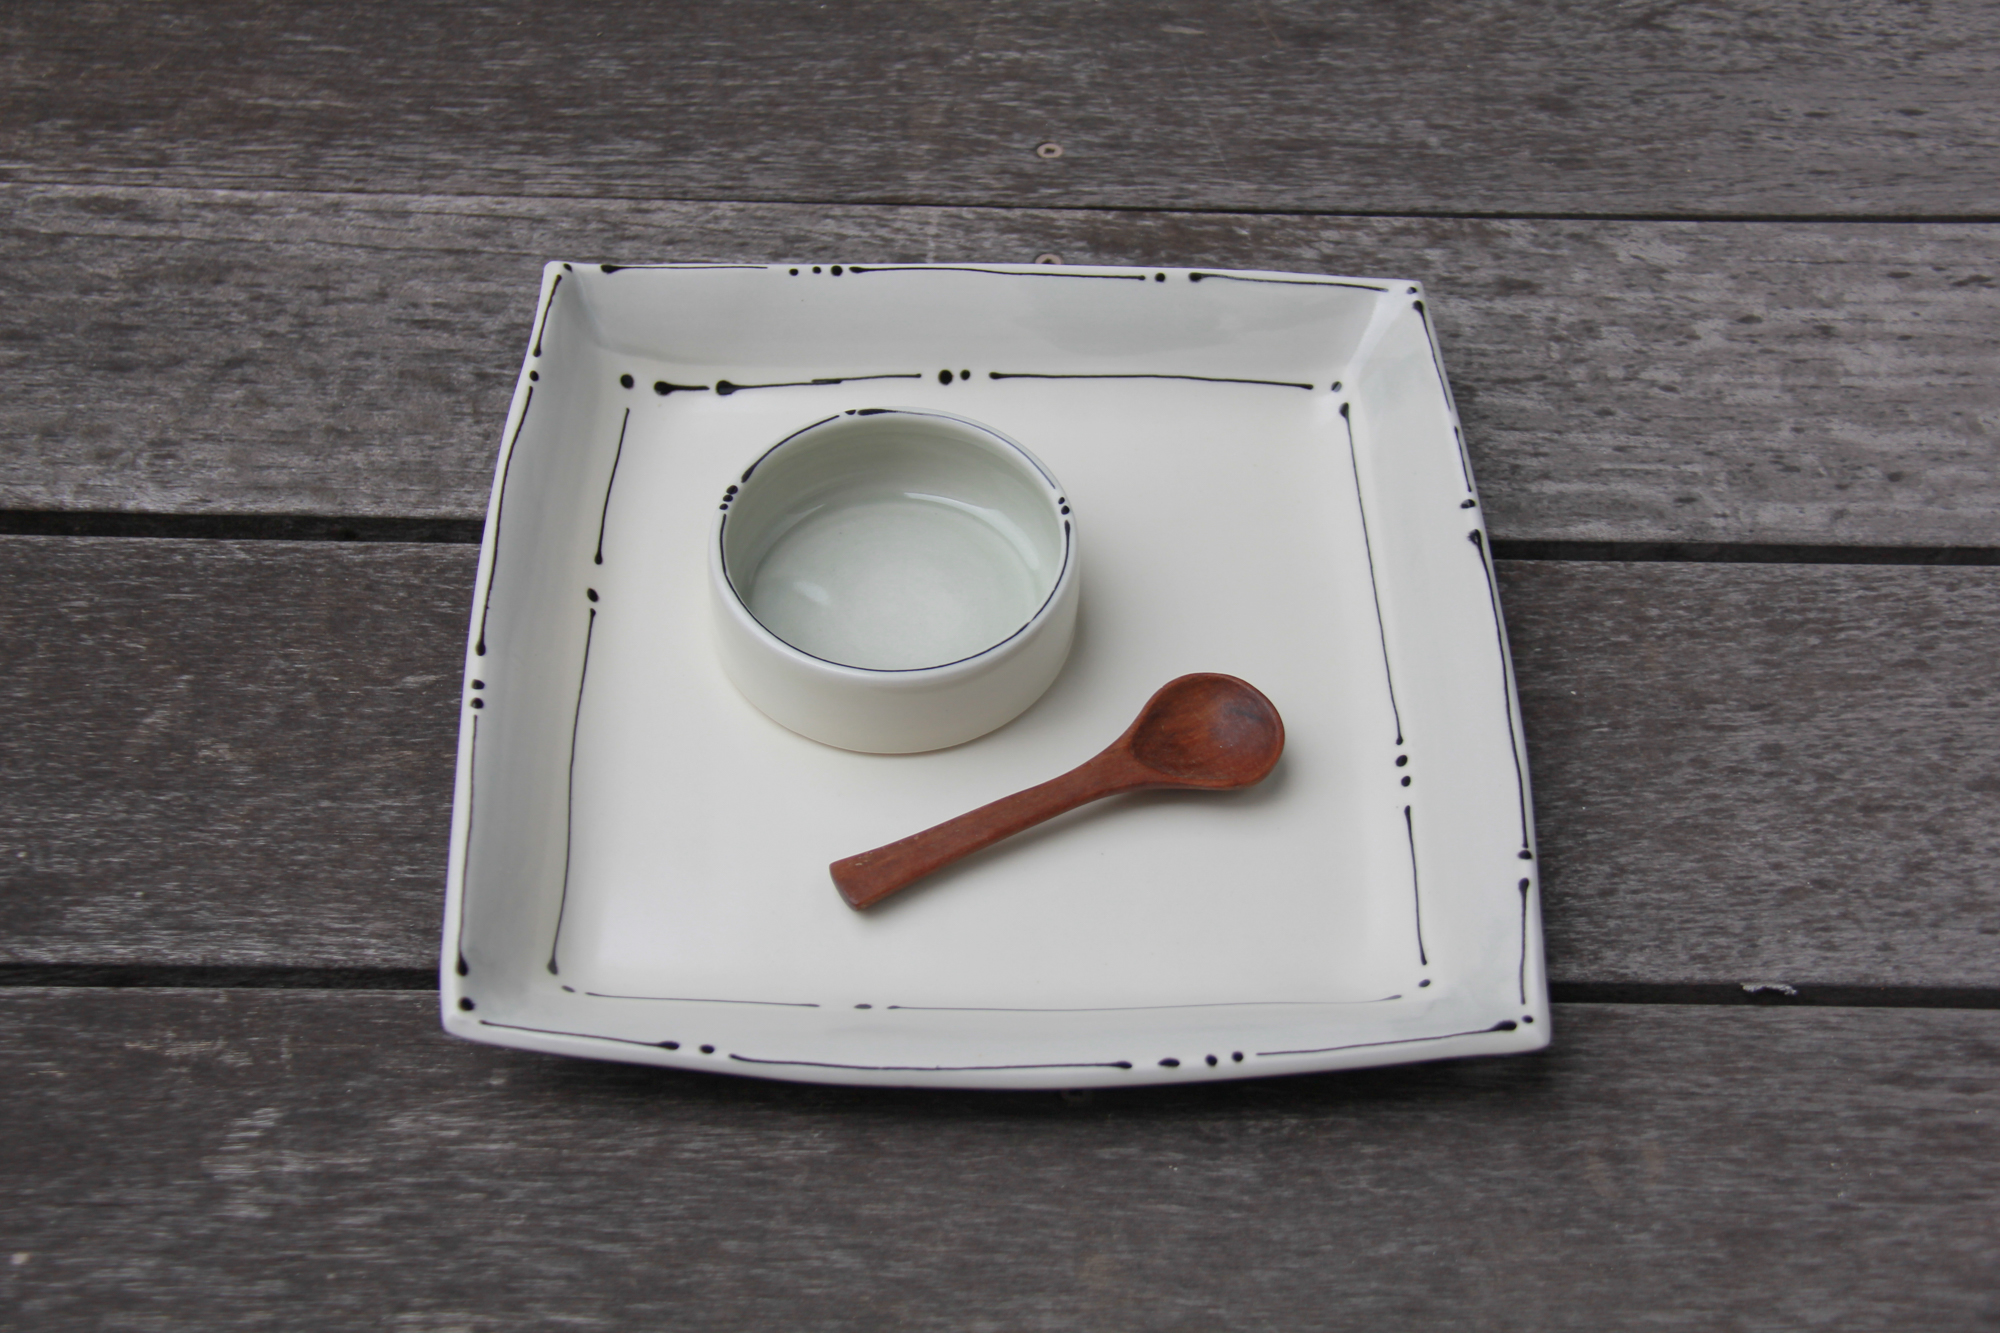 Iris Dorton: Medium Tray with Circle Dot Line Motif, comes with Wood Spoon and Dish Product Image 4 of 11